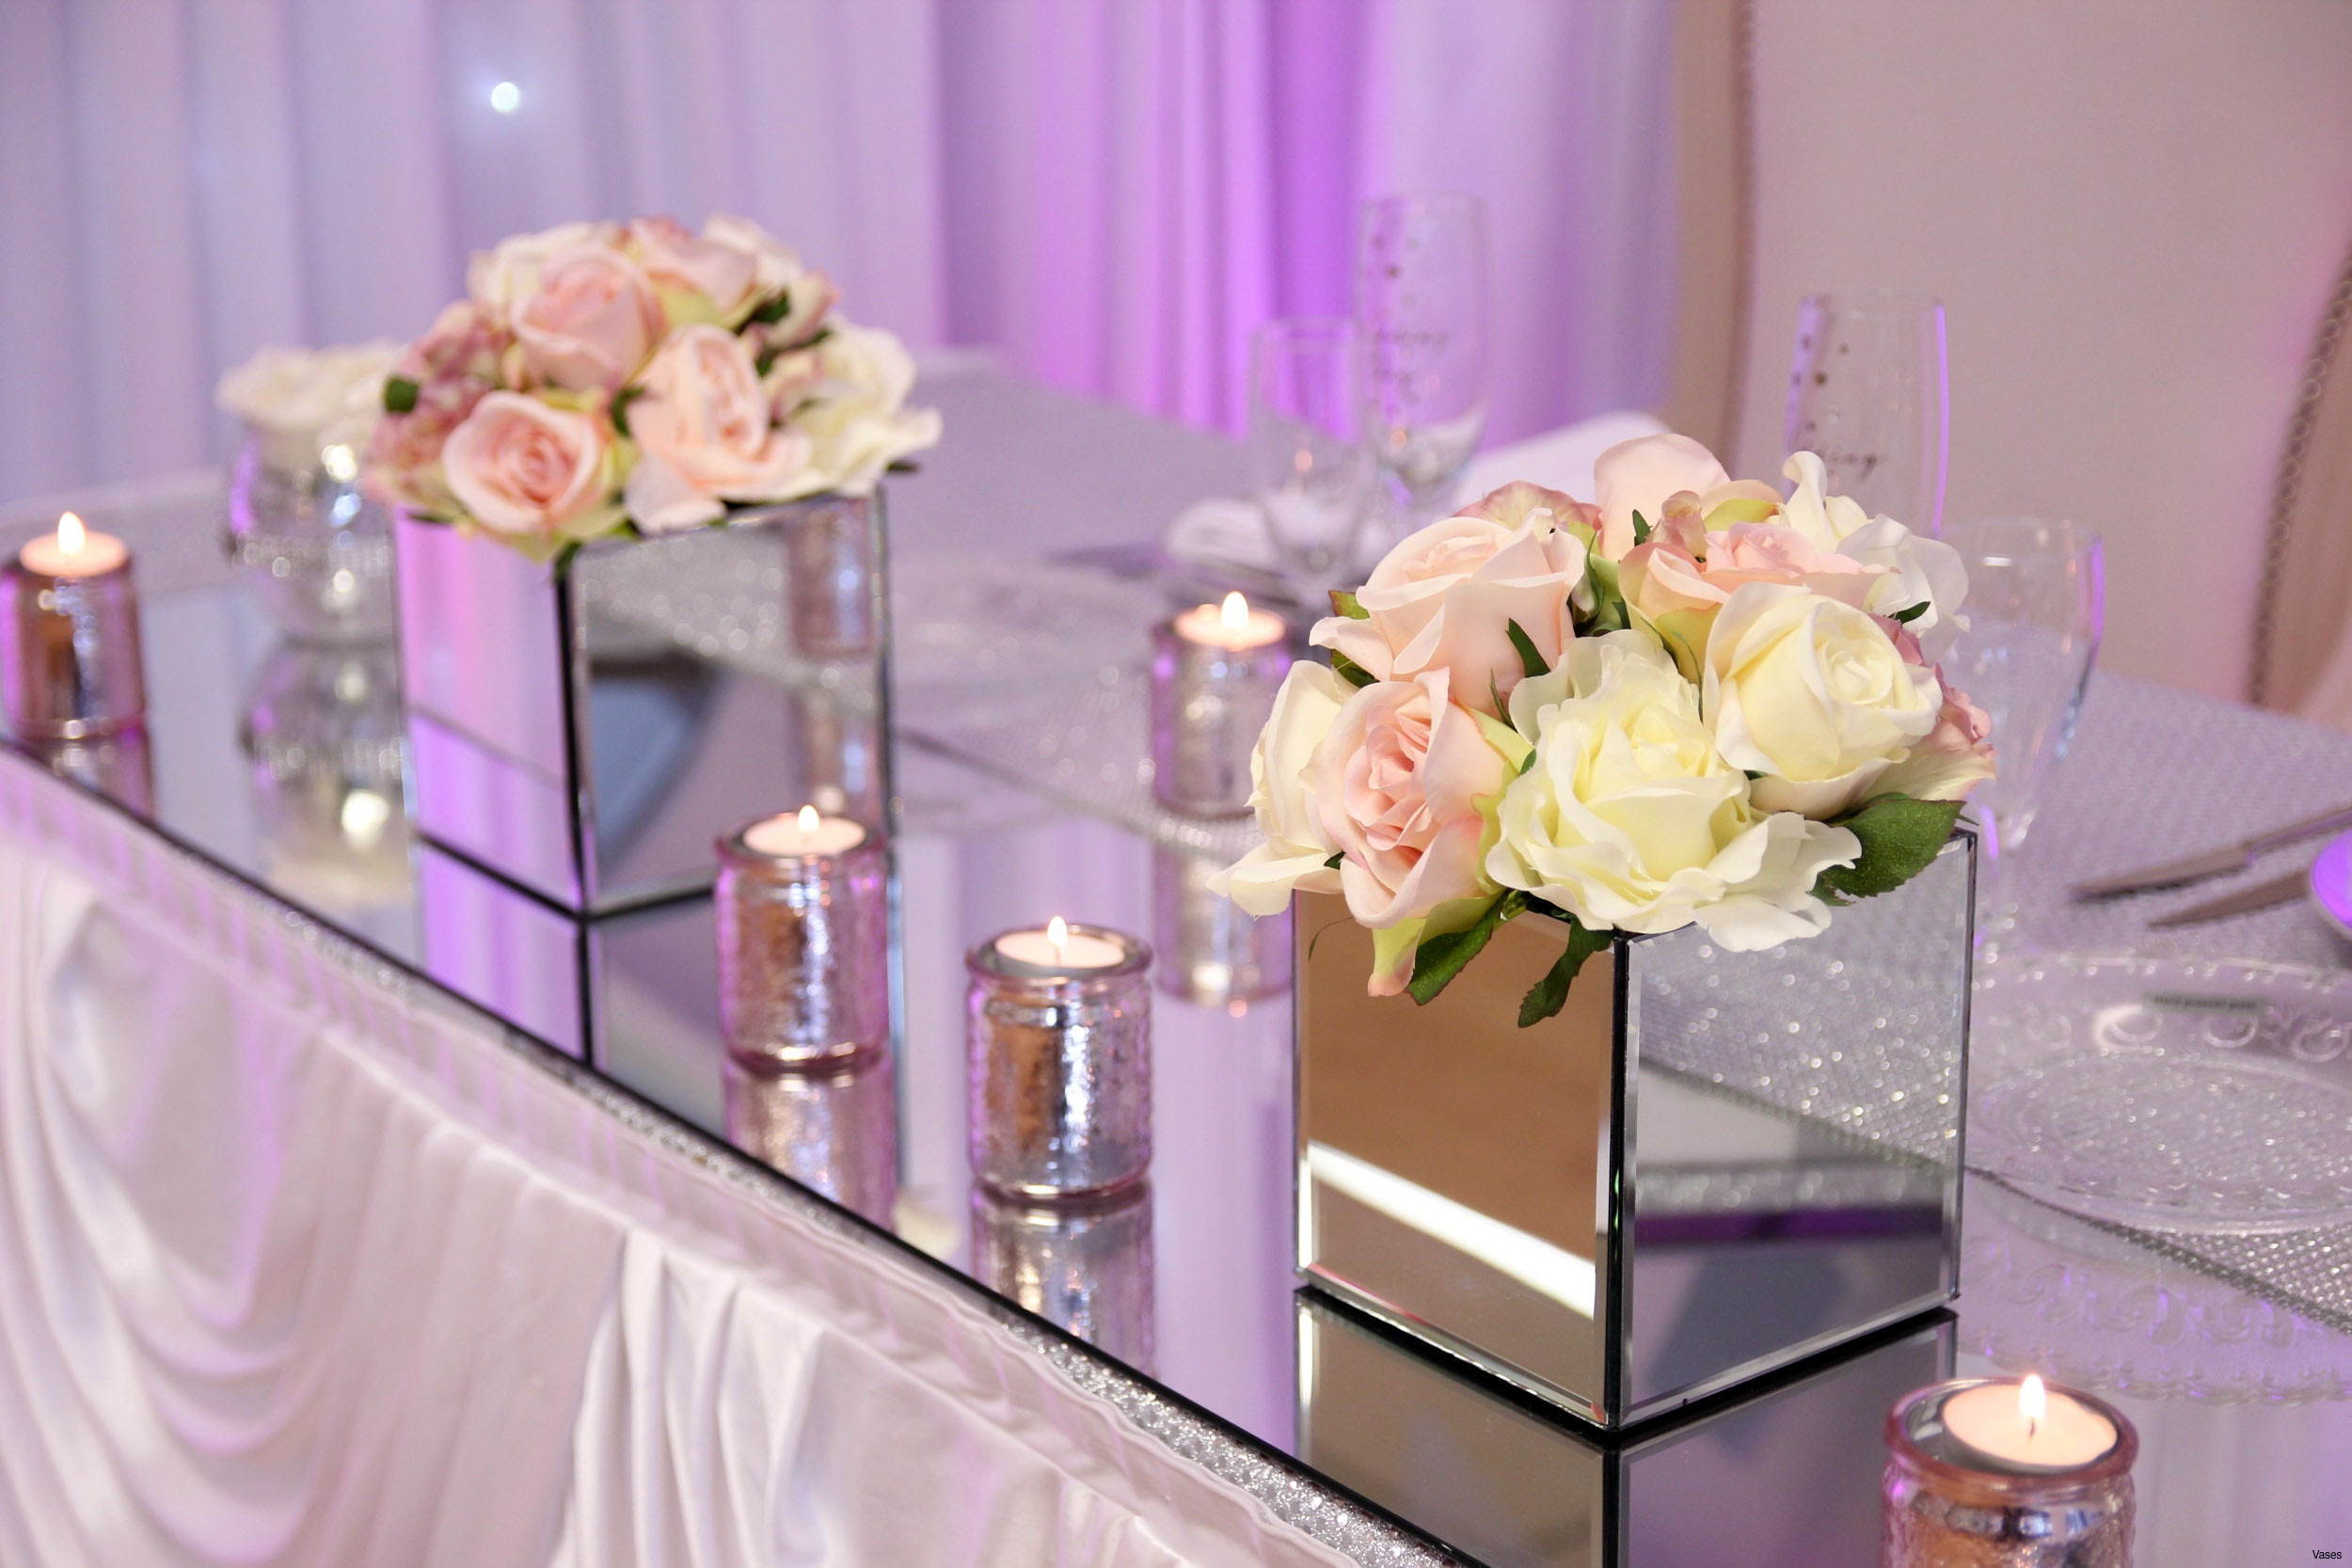 13 Stunning where Can I Buy Cheap Flower Vases 2024 free download where can i buy cheap flower vases of wedding party favors awesome mirrored square vase 3h vases mirror for wedding party favors awesome mirrored square vase 3h vases mirror table decoration